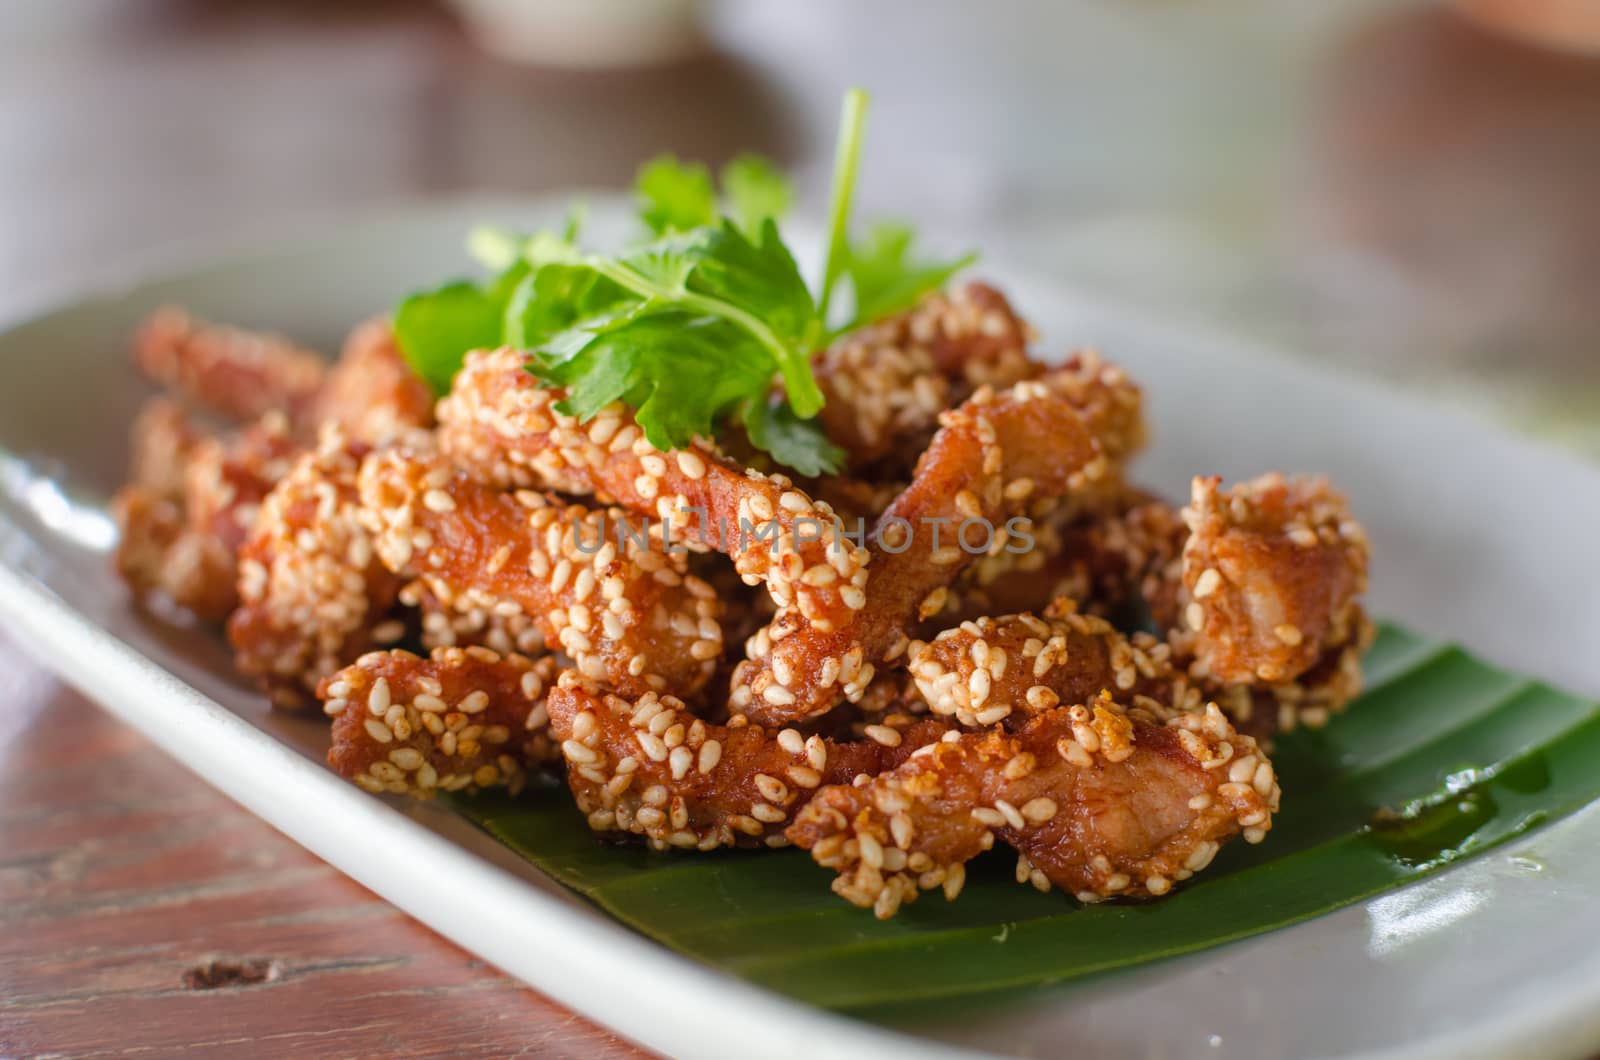 Fried pork marinated with garlic, pepper and sesame.